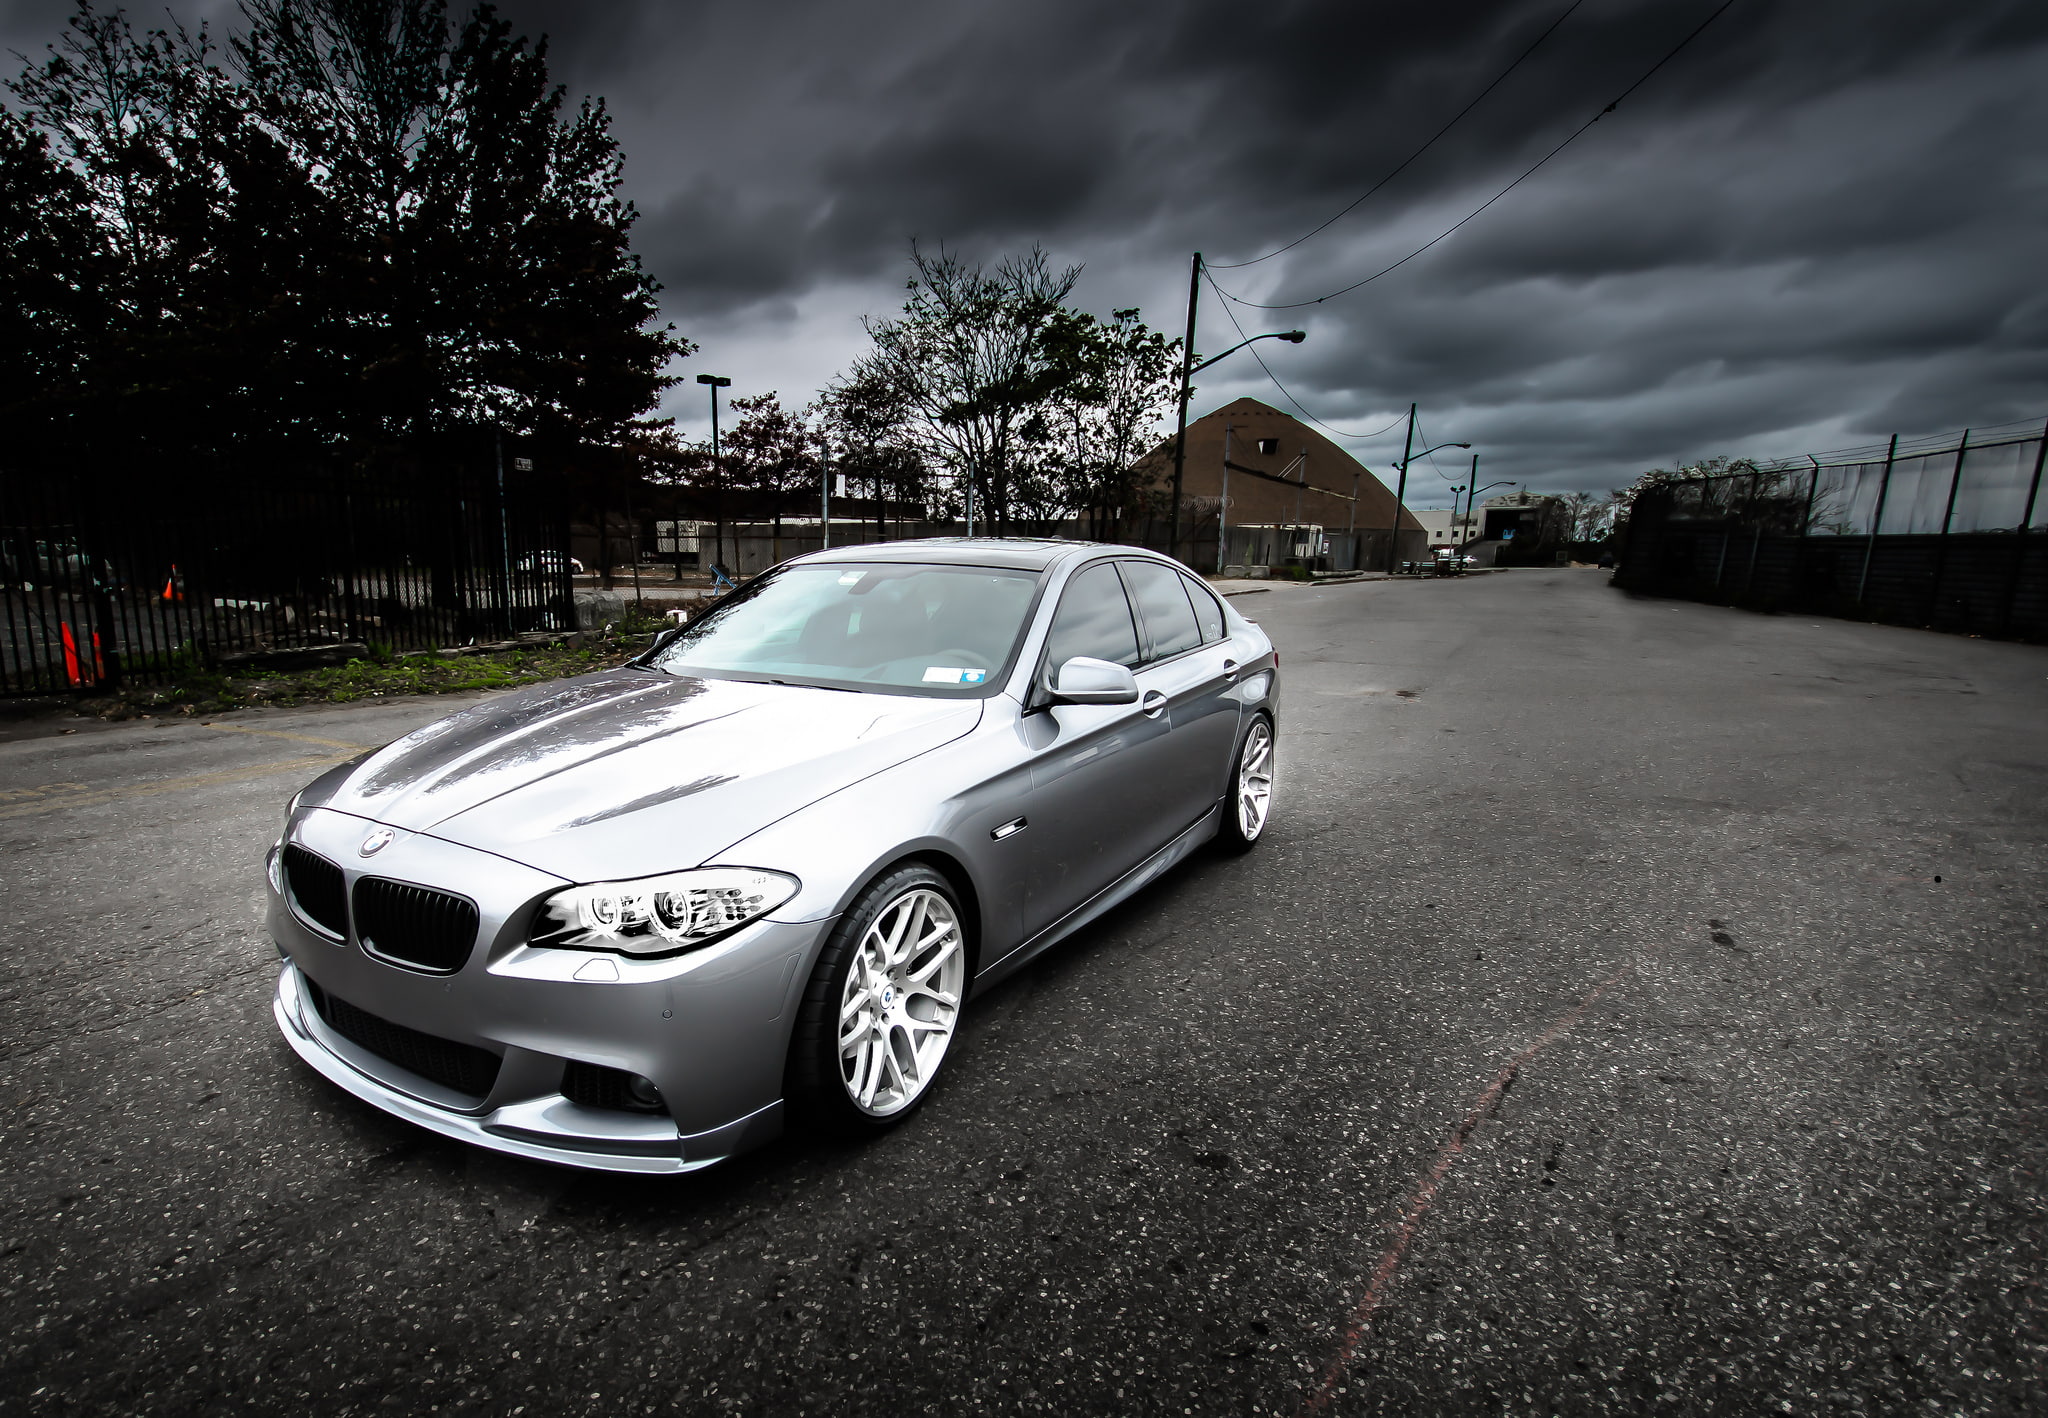 reflection, BMW, silver, front view, f10, silvery